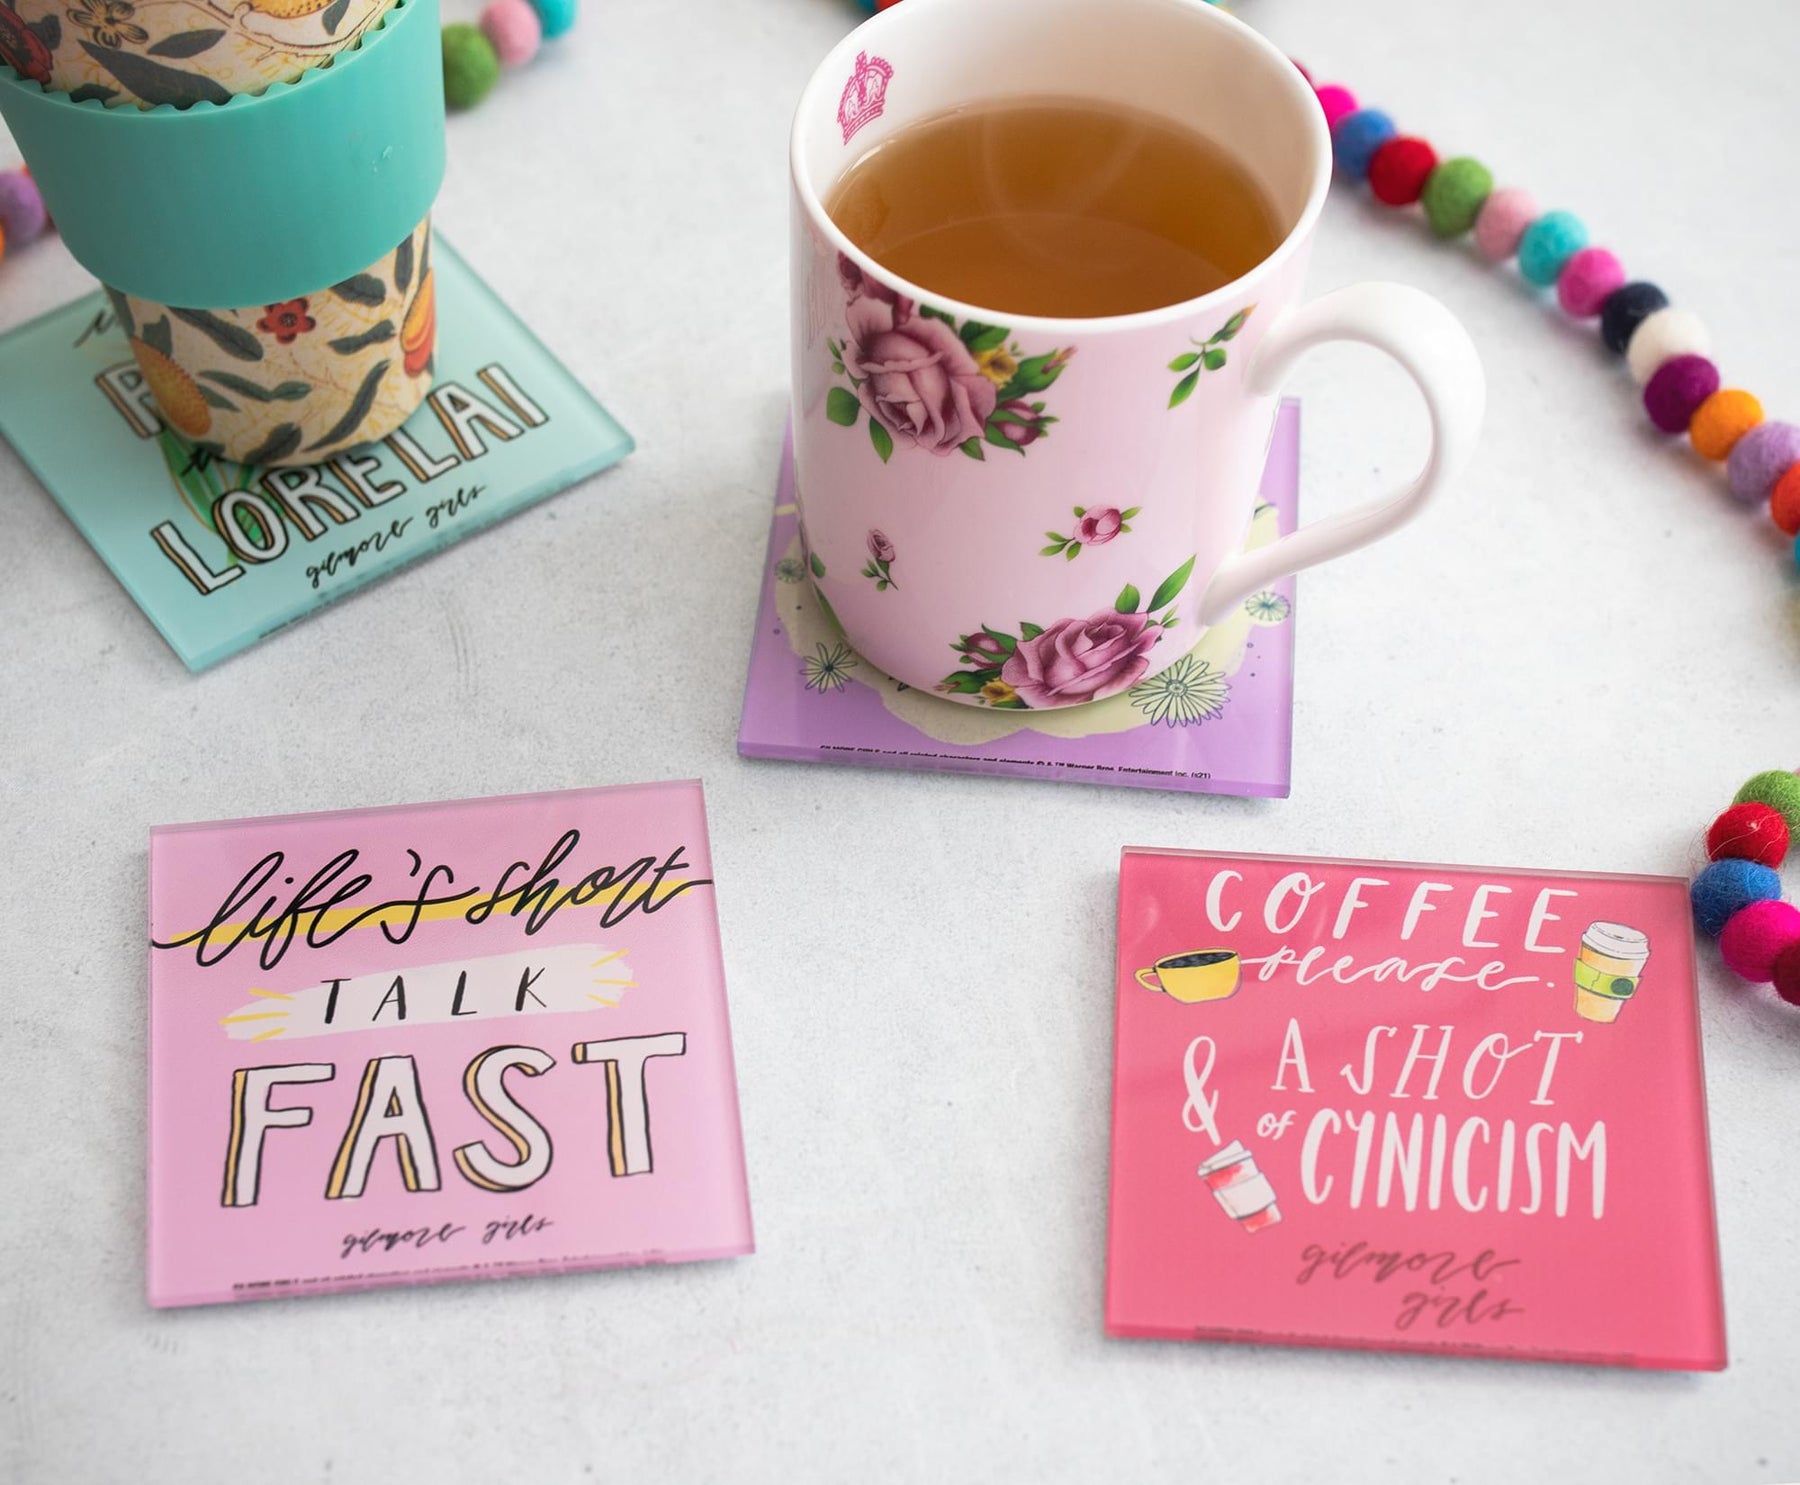 Gilmore Girls Quotes Glass Coasters | Set of 4